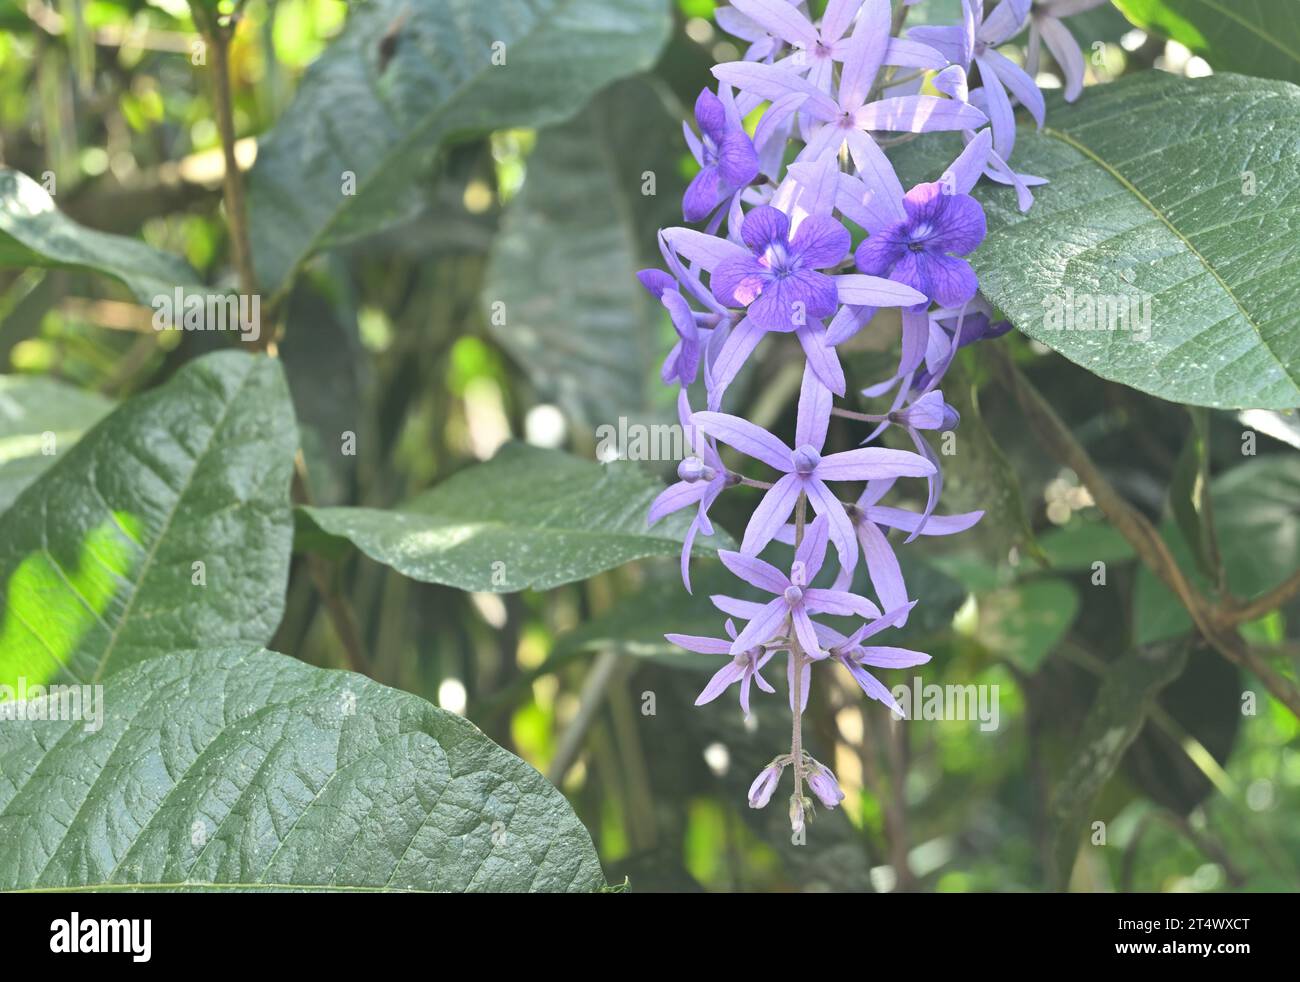 View of a blooming inflorescence of a Sandpaper vine (Petrea Volubilis), is hanging on a Petrea vine in the garden Stock Photo